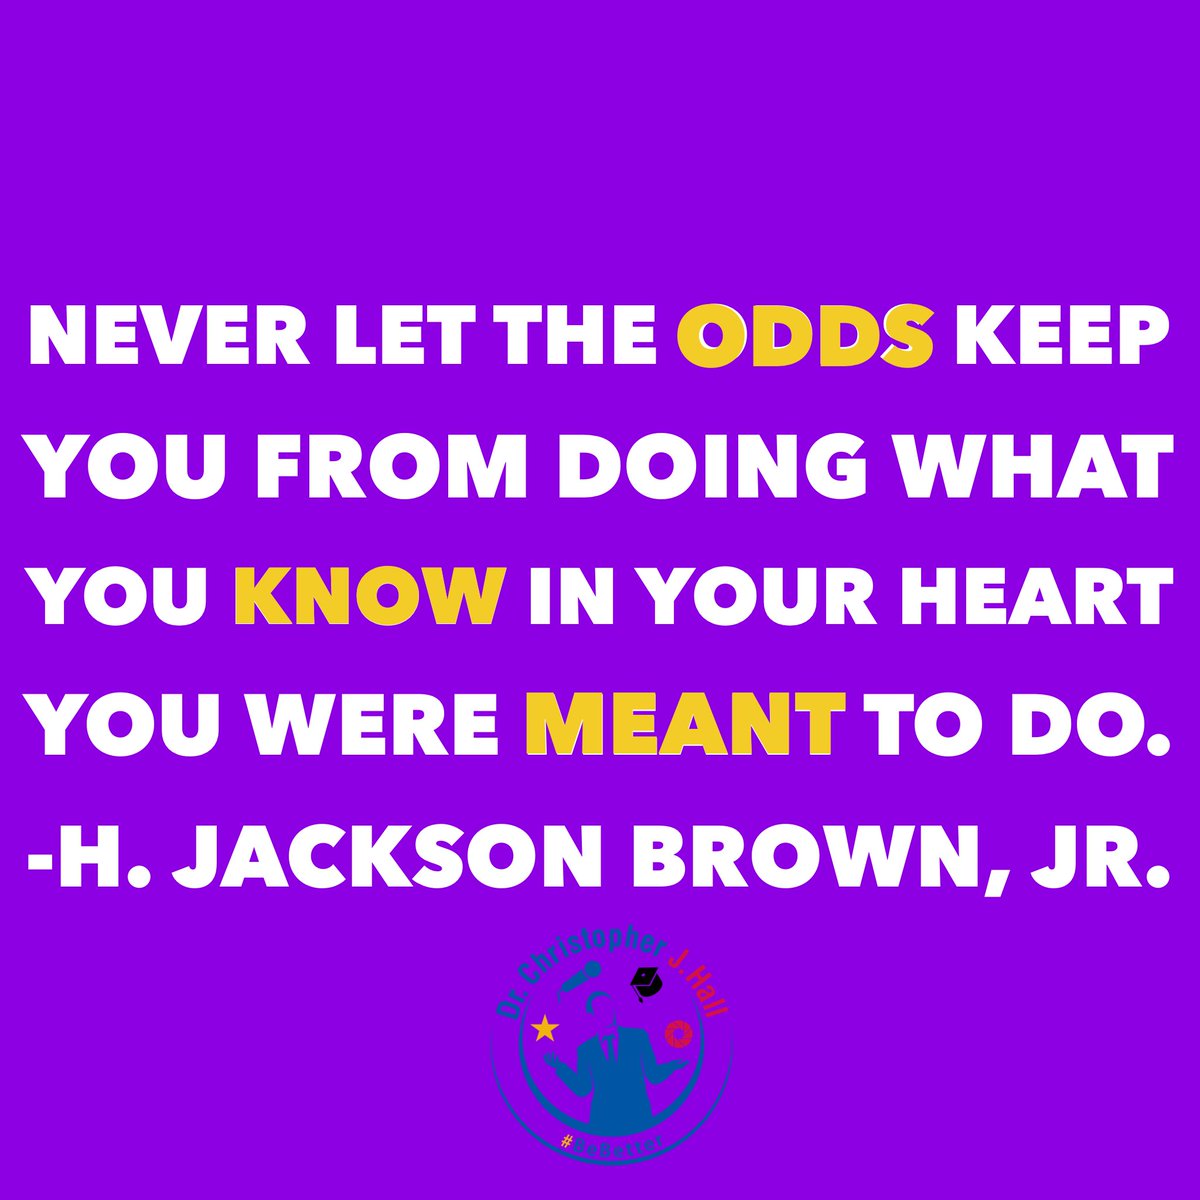 Never let the odds keep you from doing what you know in your heart you were meant to do. H. Jackson Brown, Jr.
.
#odds #inyourheart #meanttodo #purpose #whatisinyourheart #lifelessons #chrisjhallsc #chrisjhall #motivation #inspiration #inspire #noexcuses #BeBetter #Stayfocused